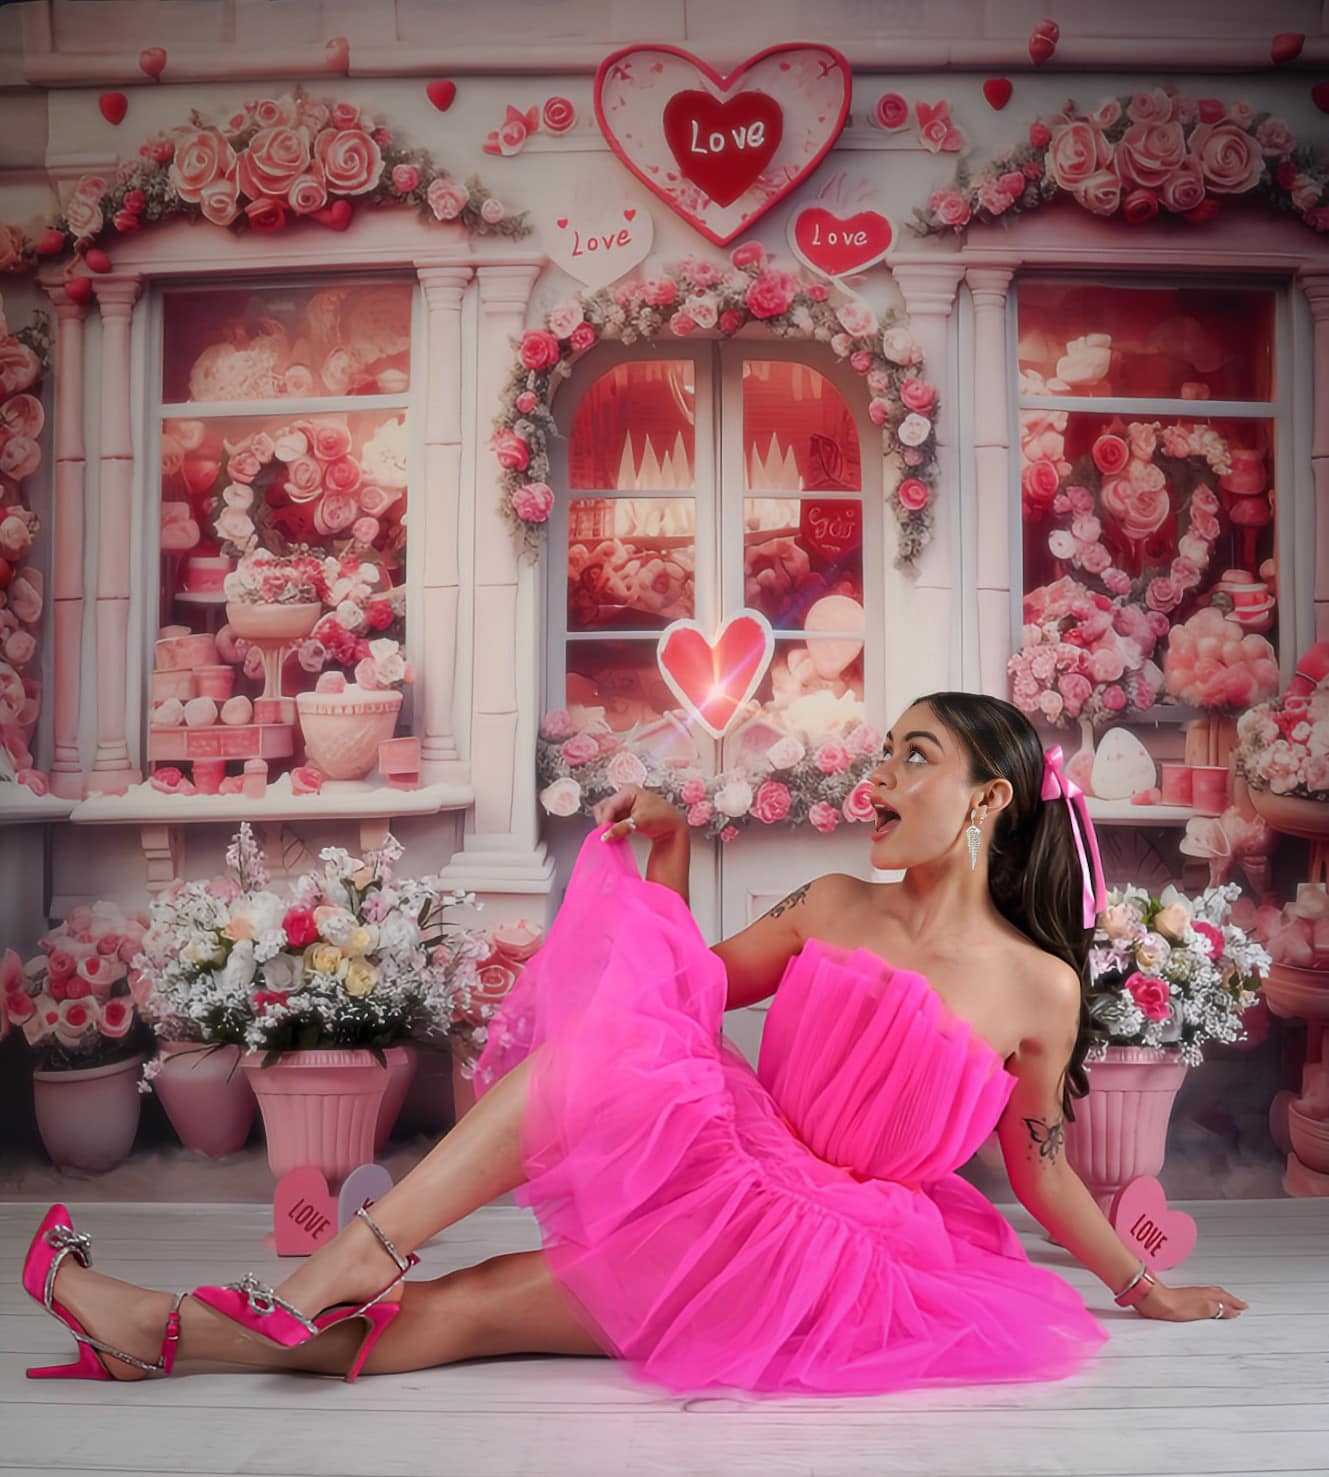 Kate Valentine's Day Pink Rose House Backdrop Designed by Chain Photography